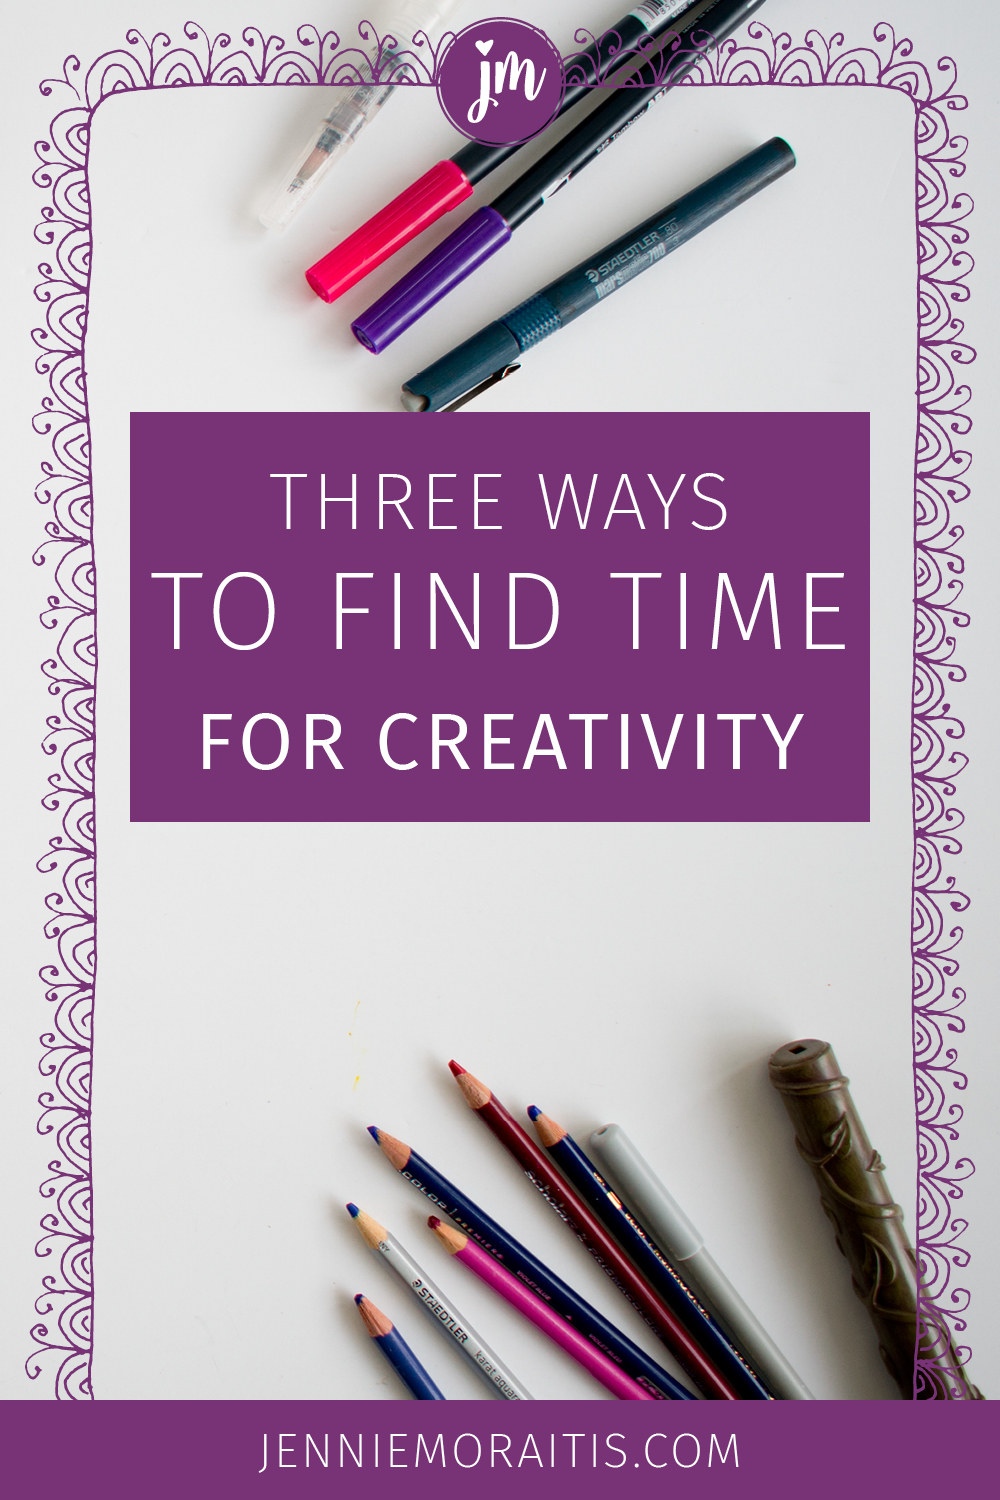 Oh my goodness, I NEED this! I always struggle to find time for creativity and my creative projects because I want to do them all...I knit, sew, paint, draw, and journal...But this post helped me realize how I can start doing them regularly. Yes! :)